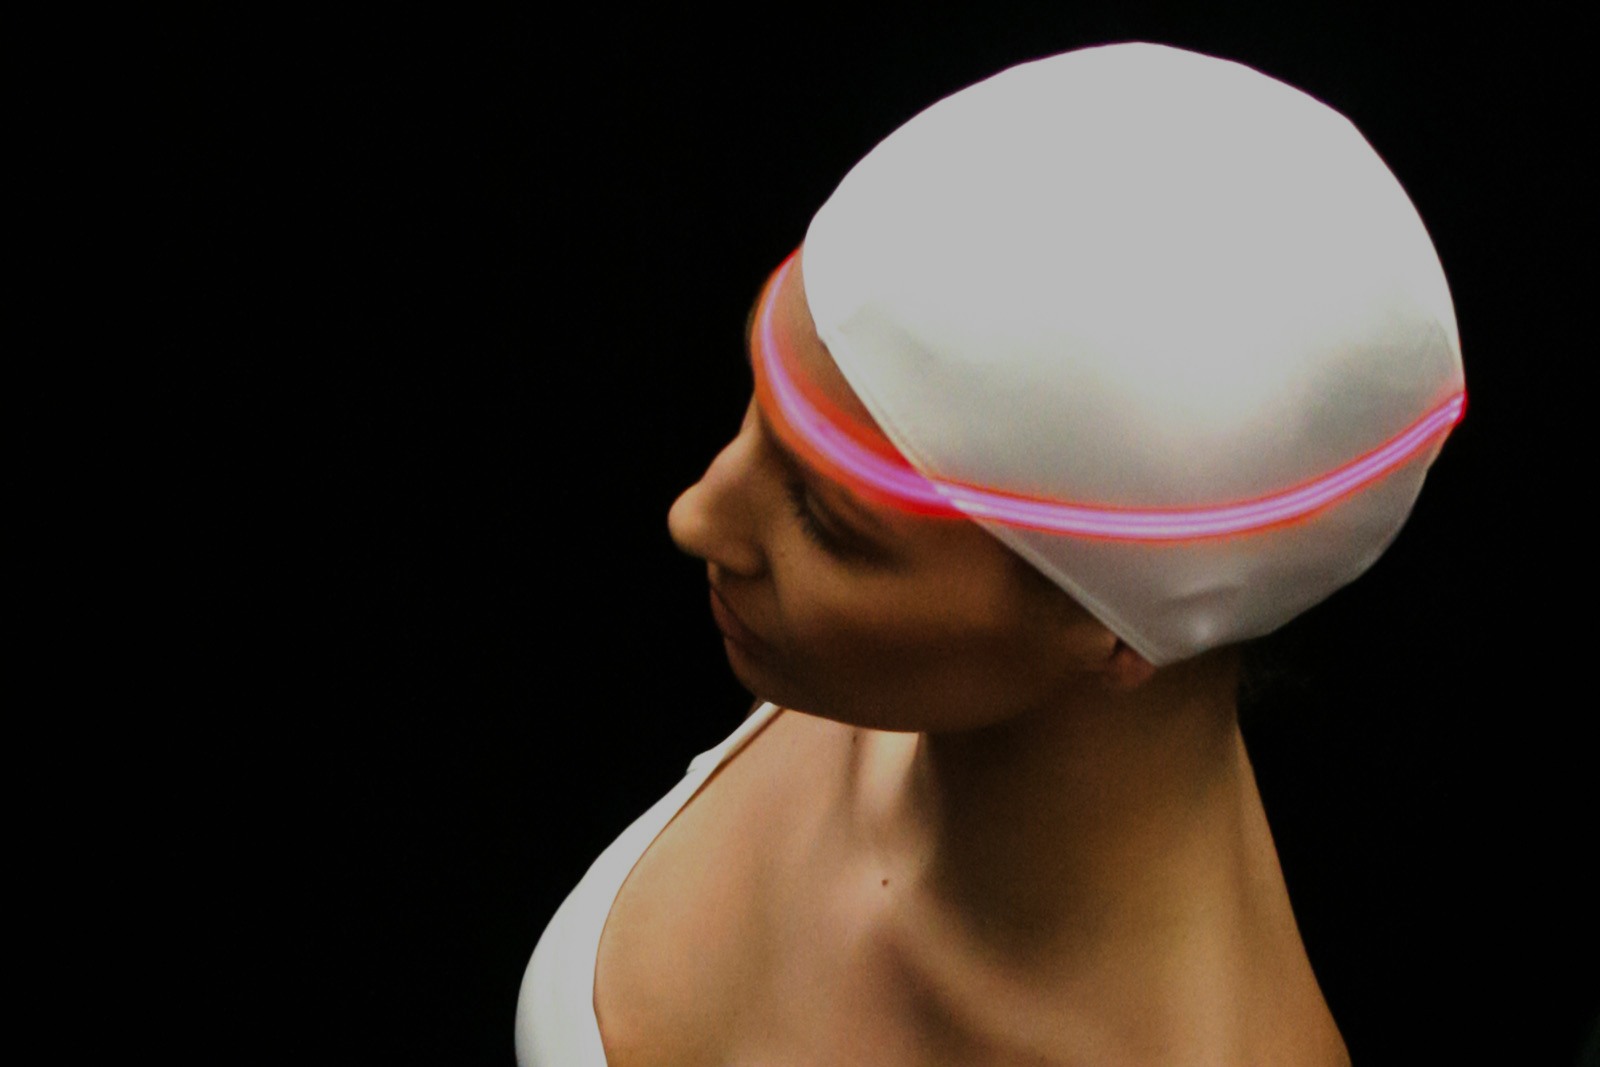 A woman's head in a scanning process